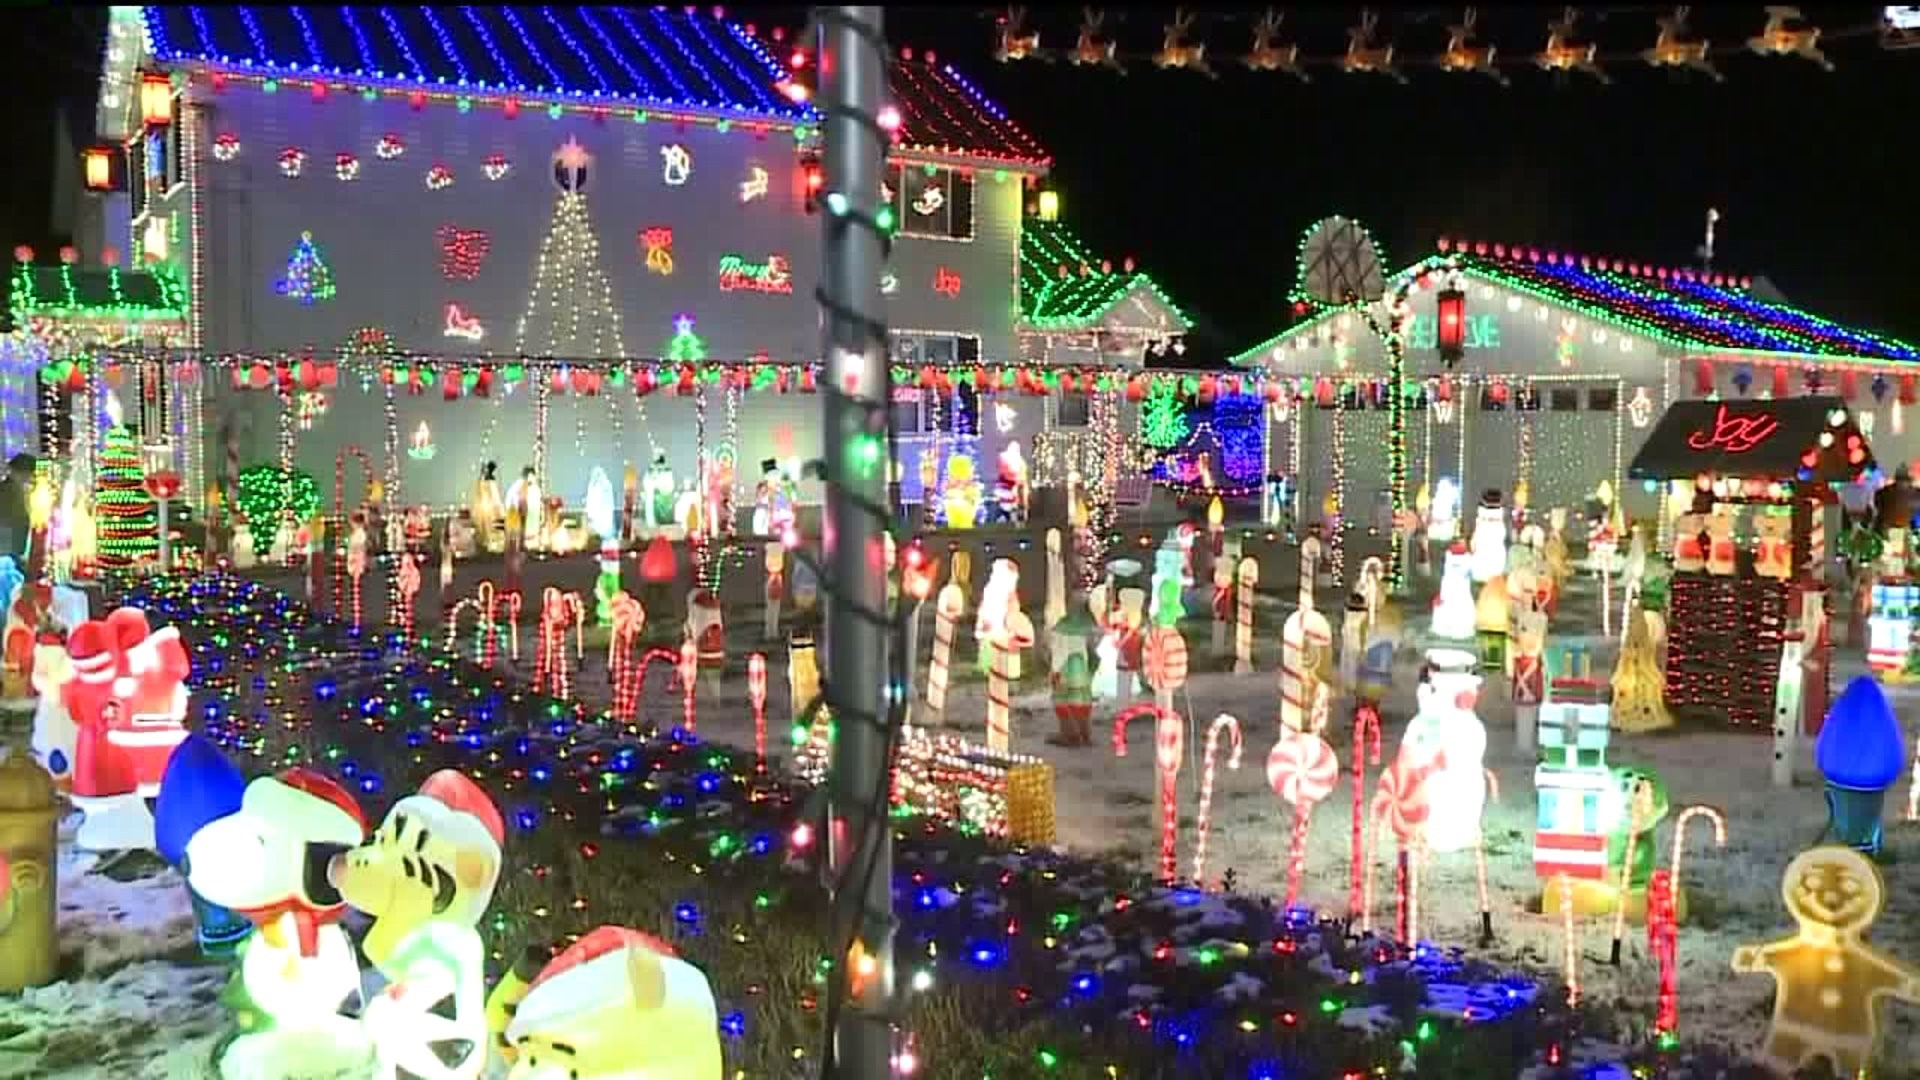 Peckville Brothers Compete On ABC's 'The Great Christmas Light Fight' Show